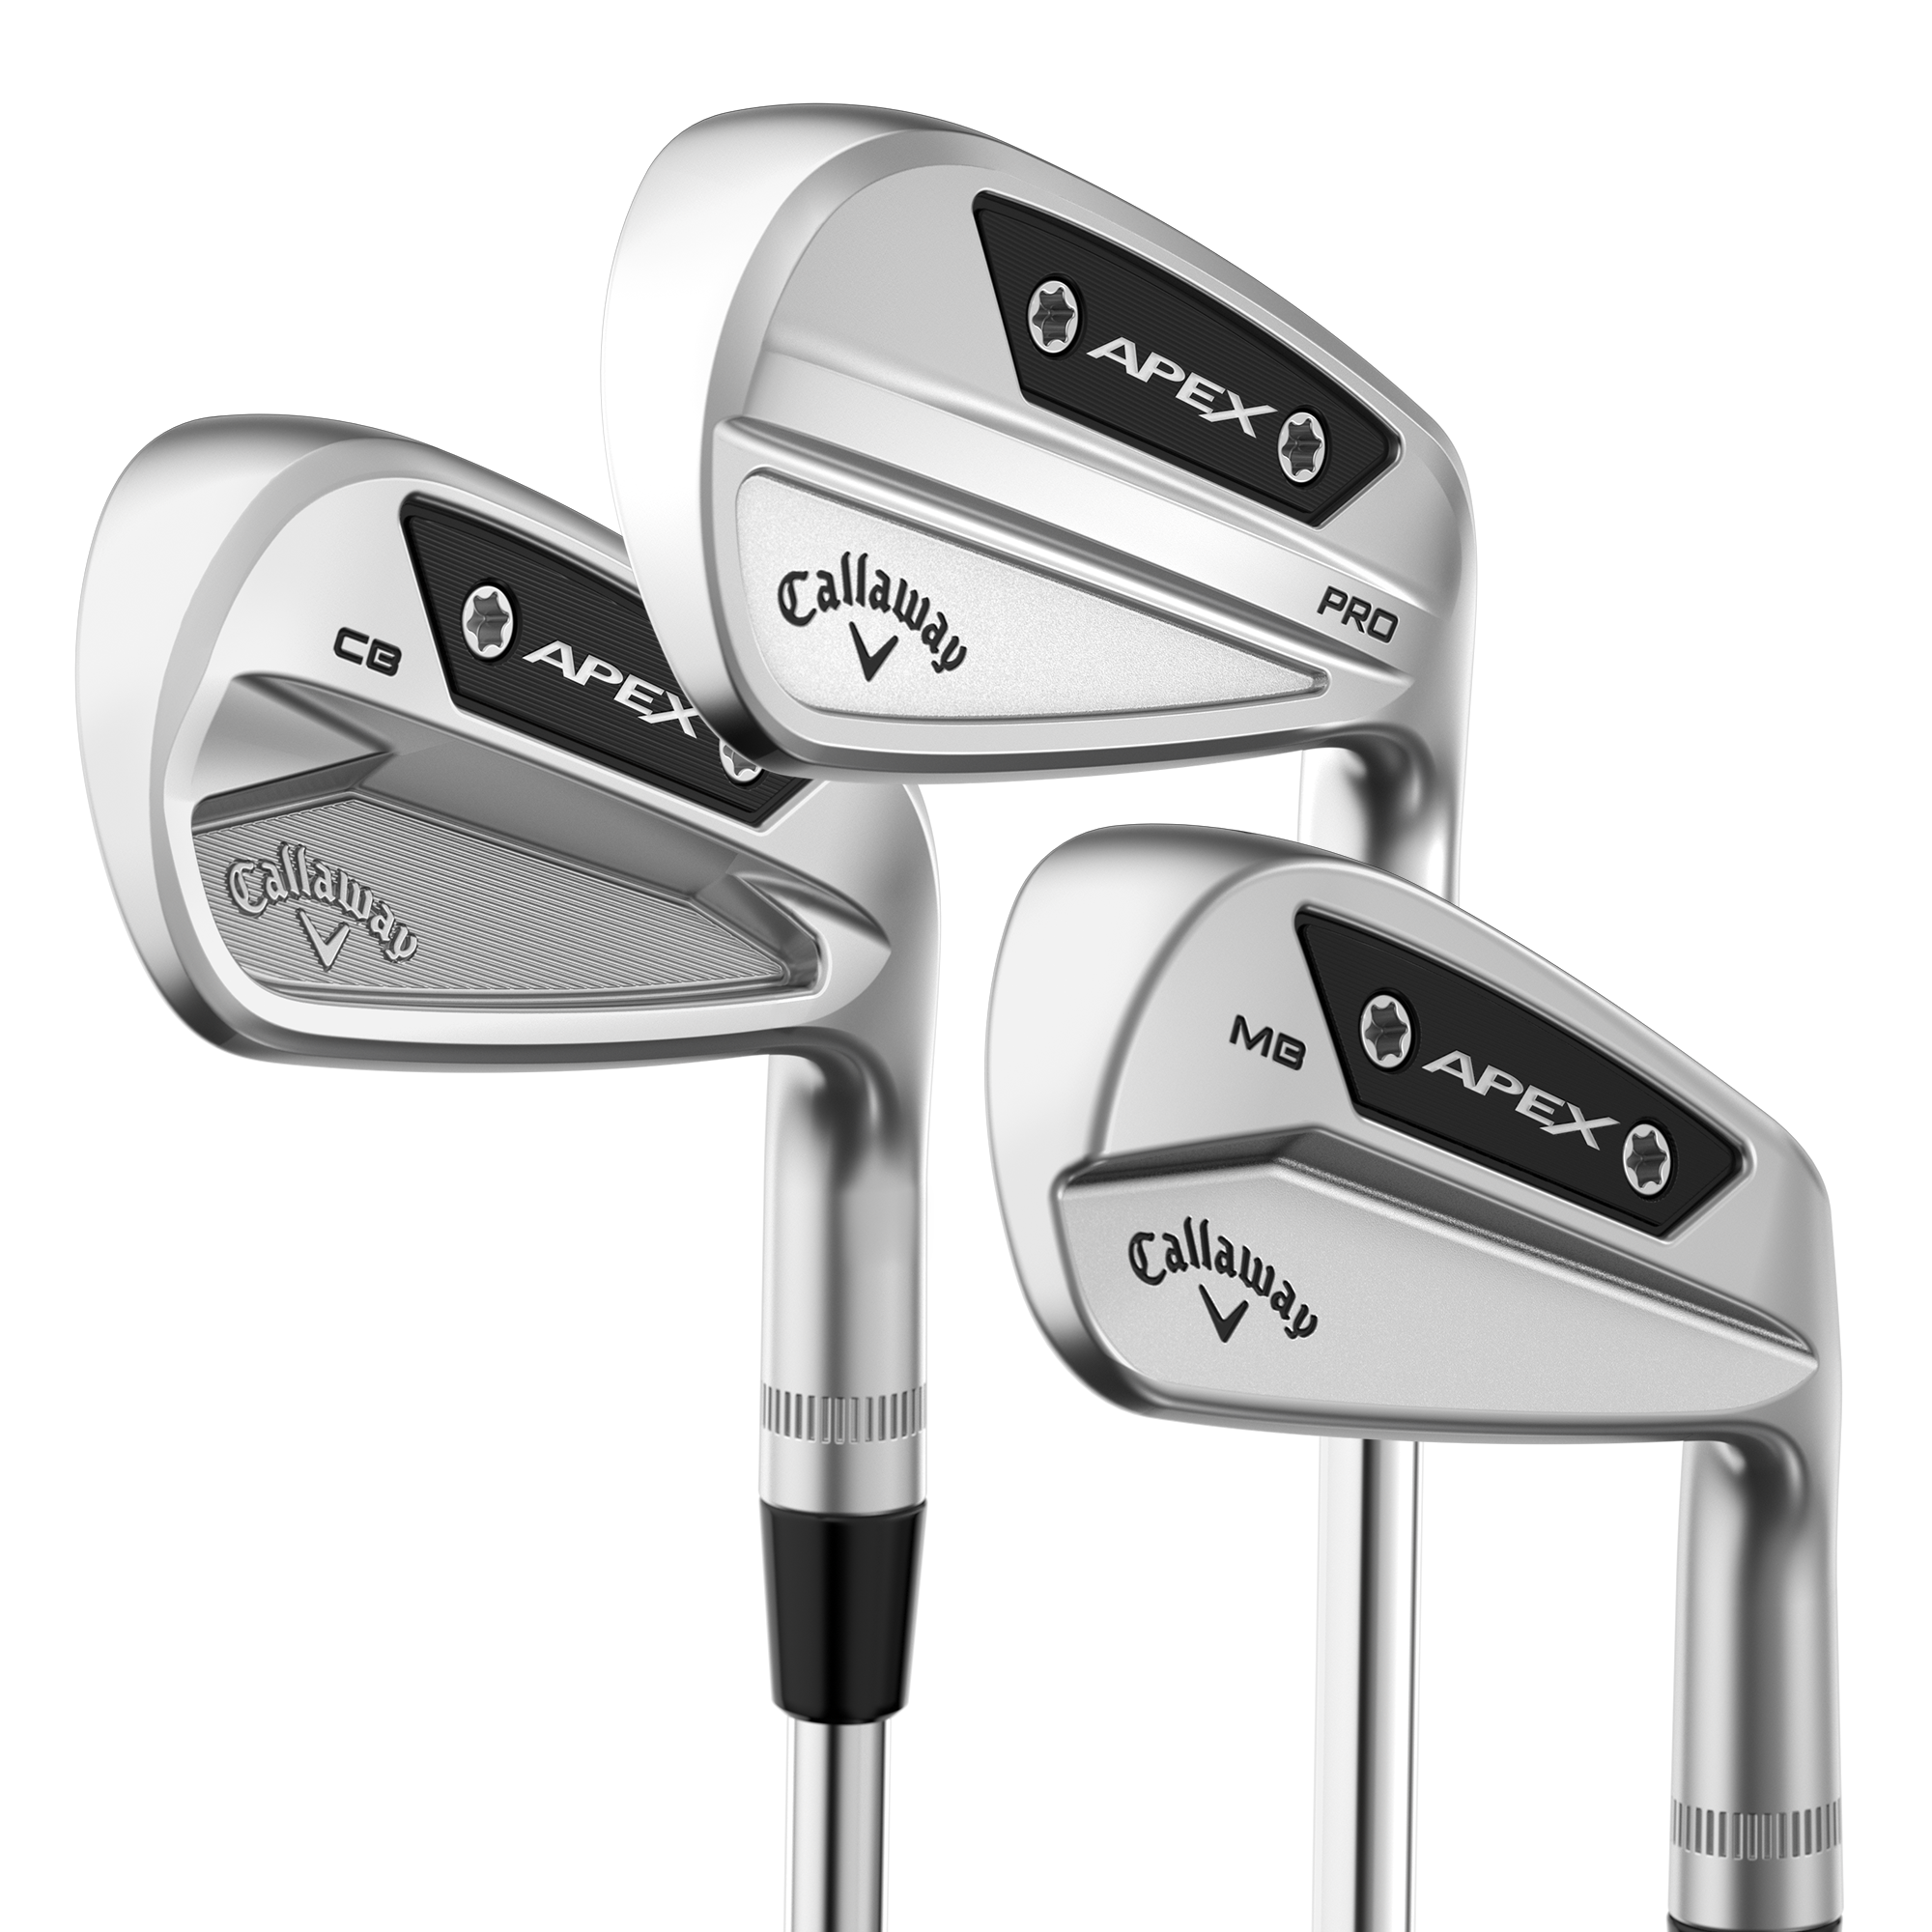 Callaway Apex Pro series irons: What you need to know